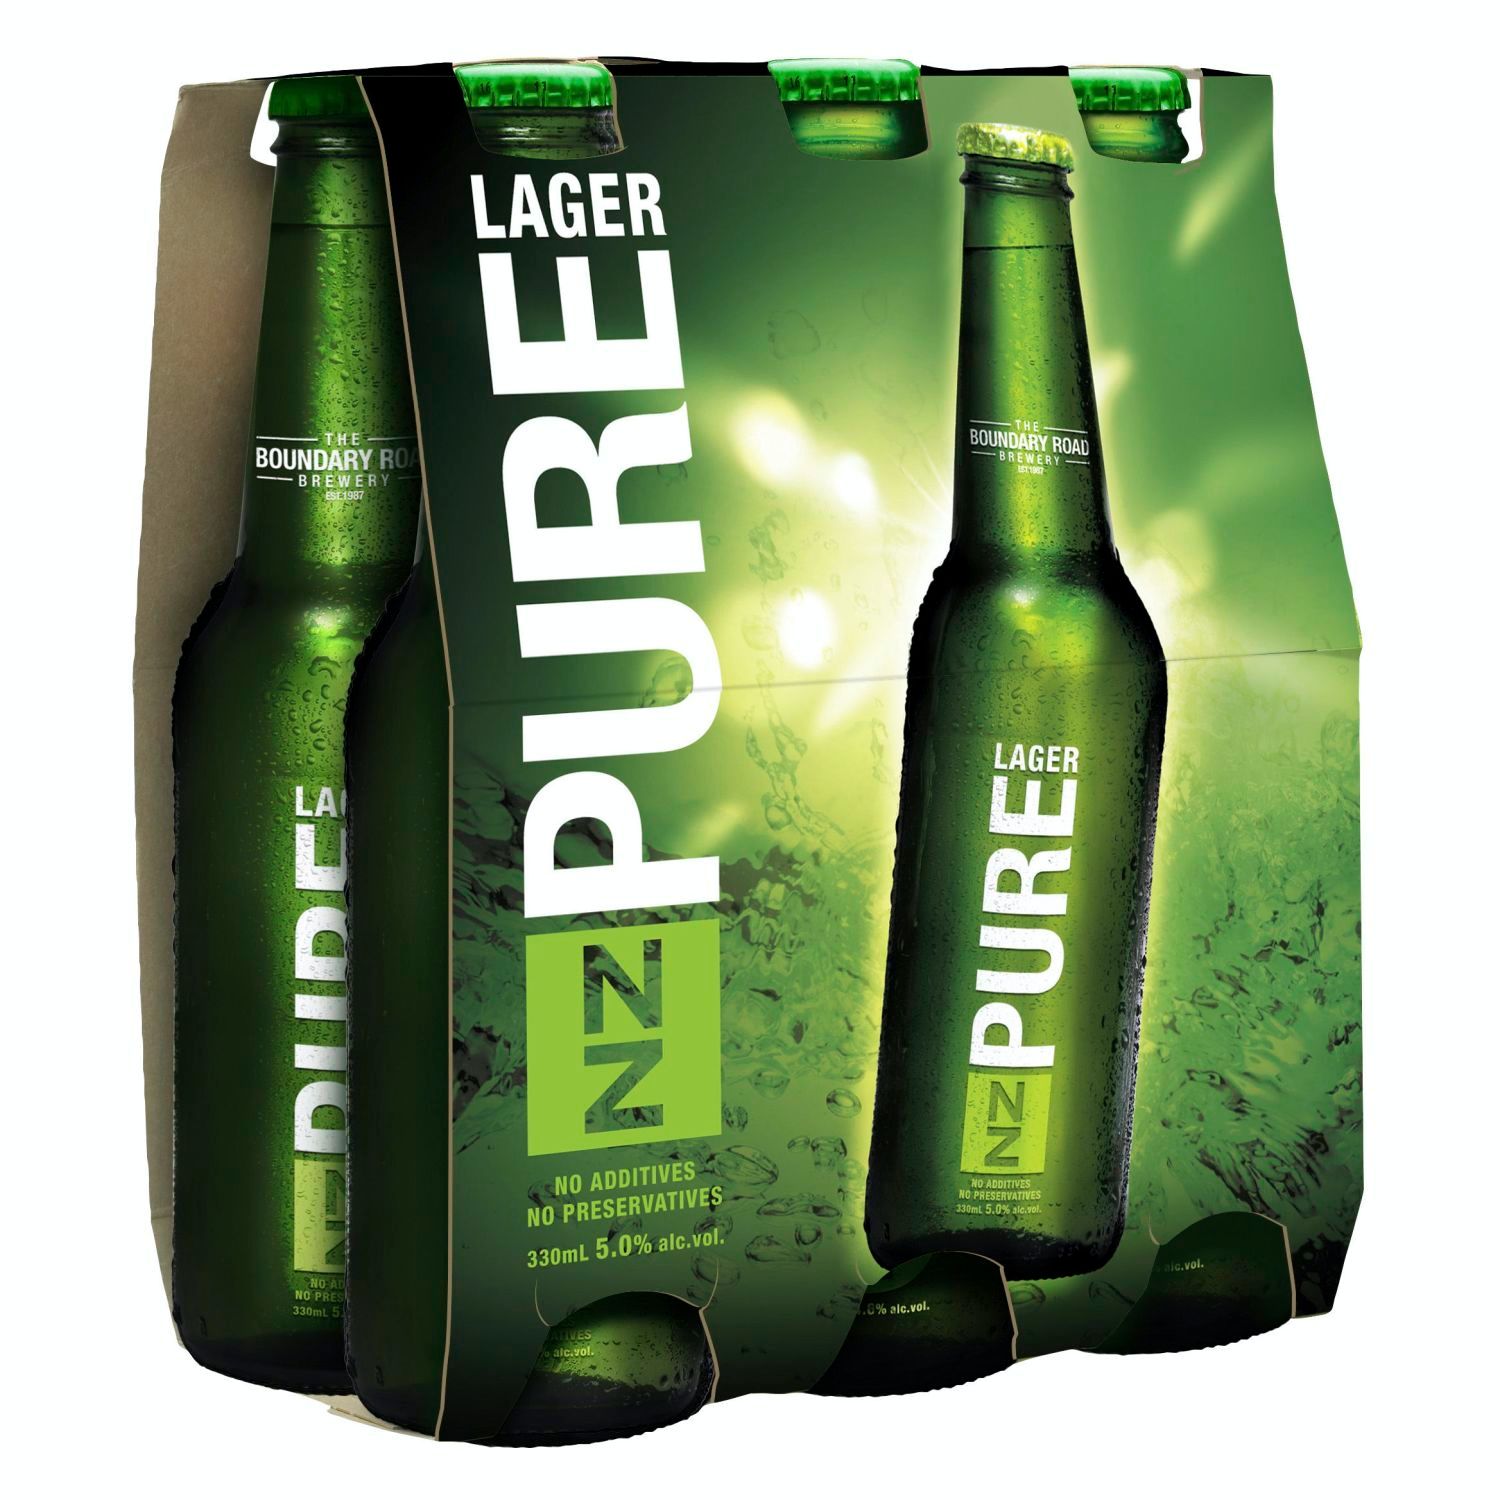 NZ Pure Lager Bottle 330mL 6 Pack